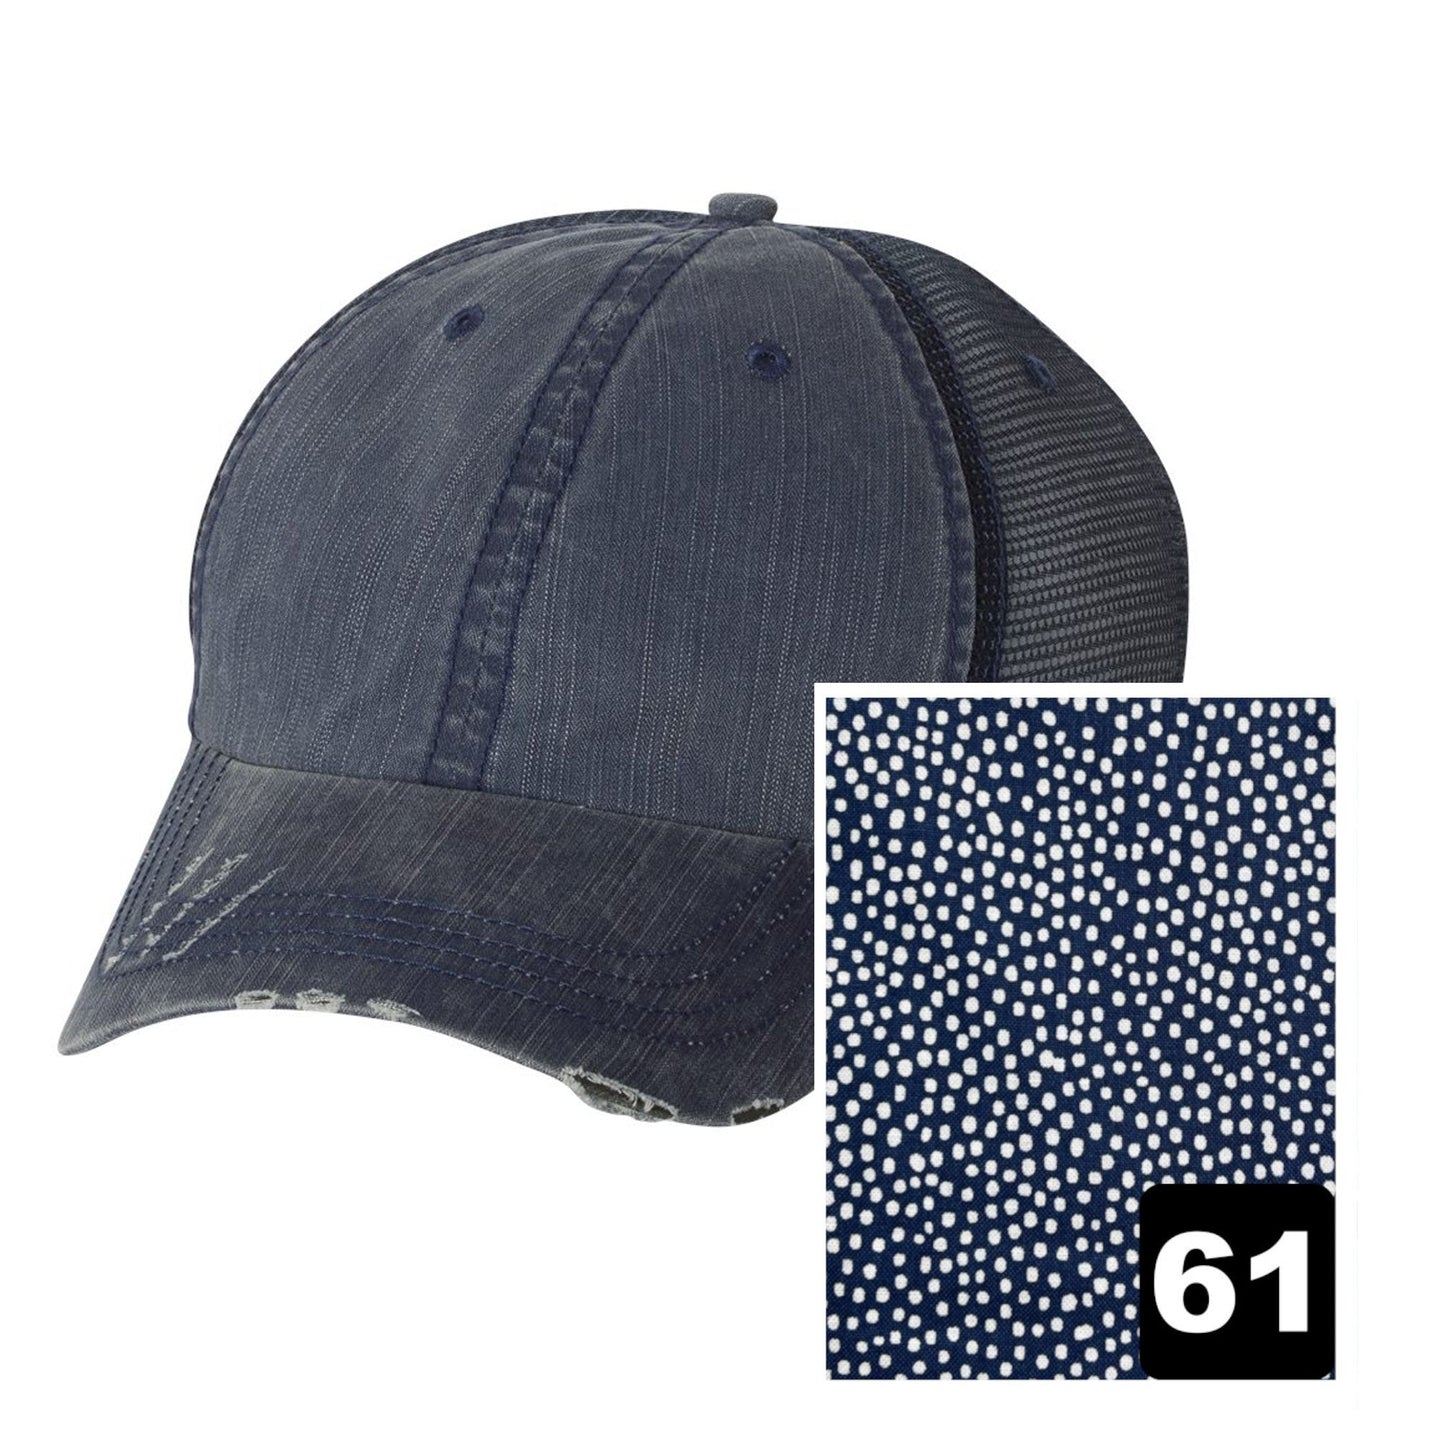 Virginia Hat | Navy Distressed Trucker Cap | Many Fabric Choices